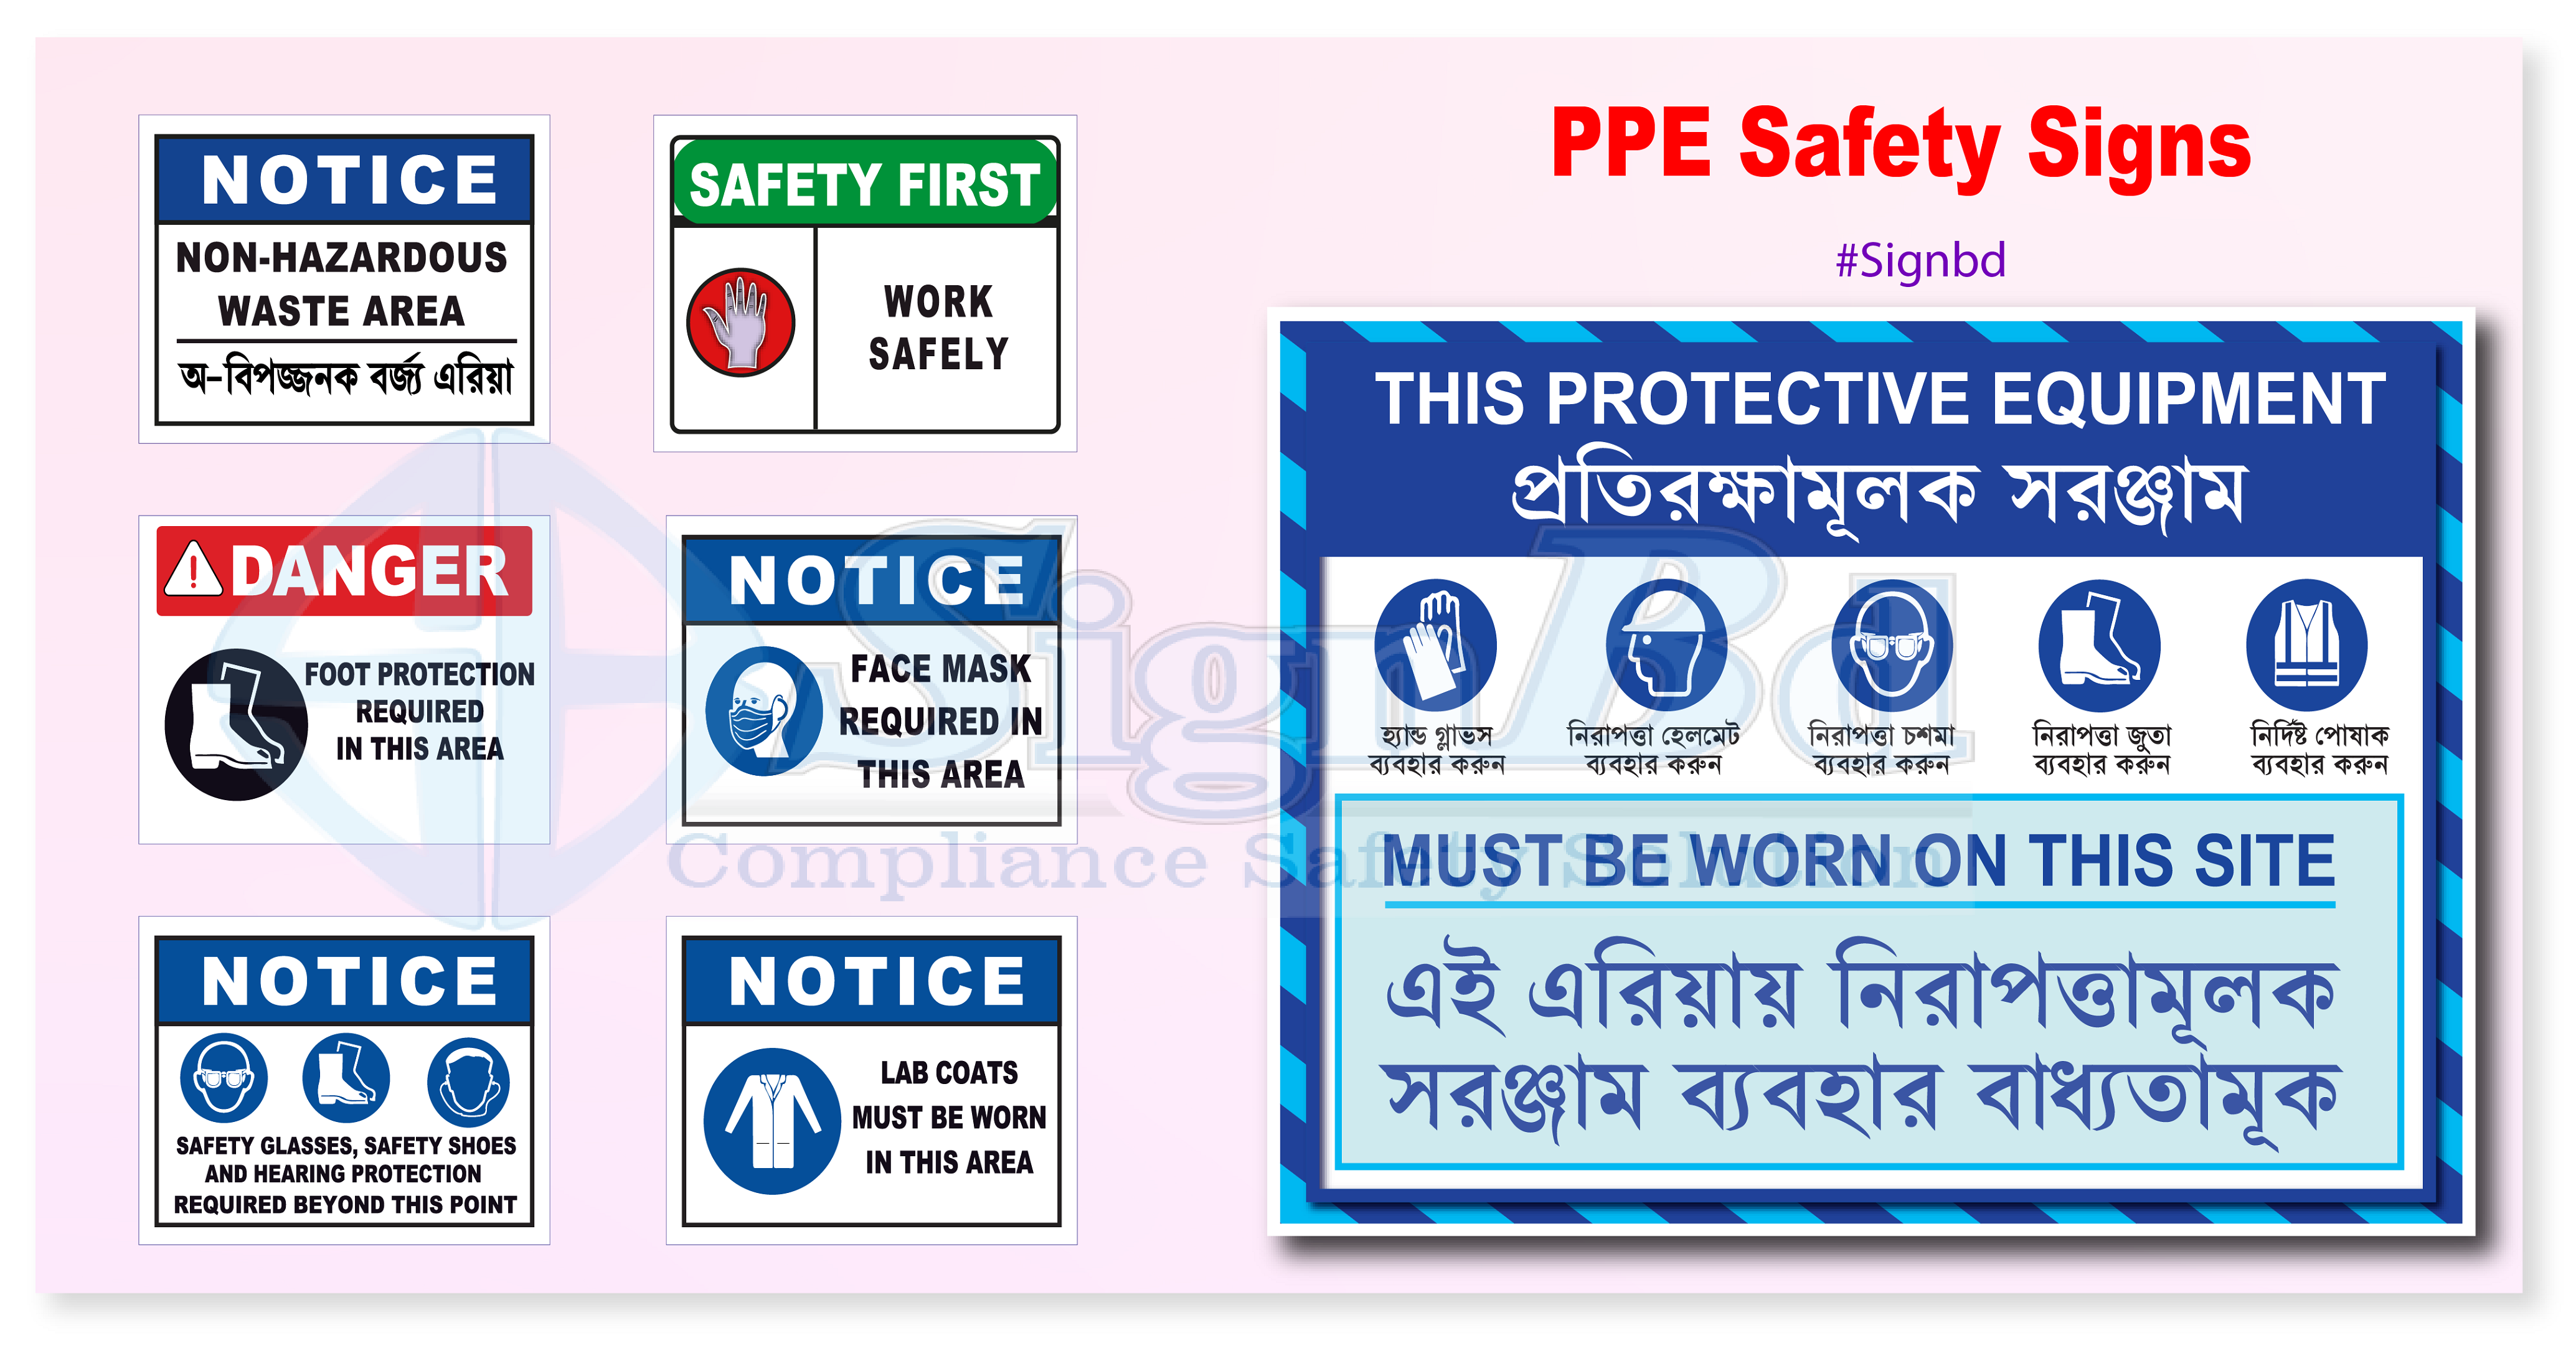 PPE safety signs